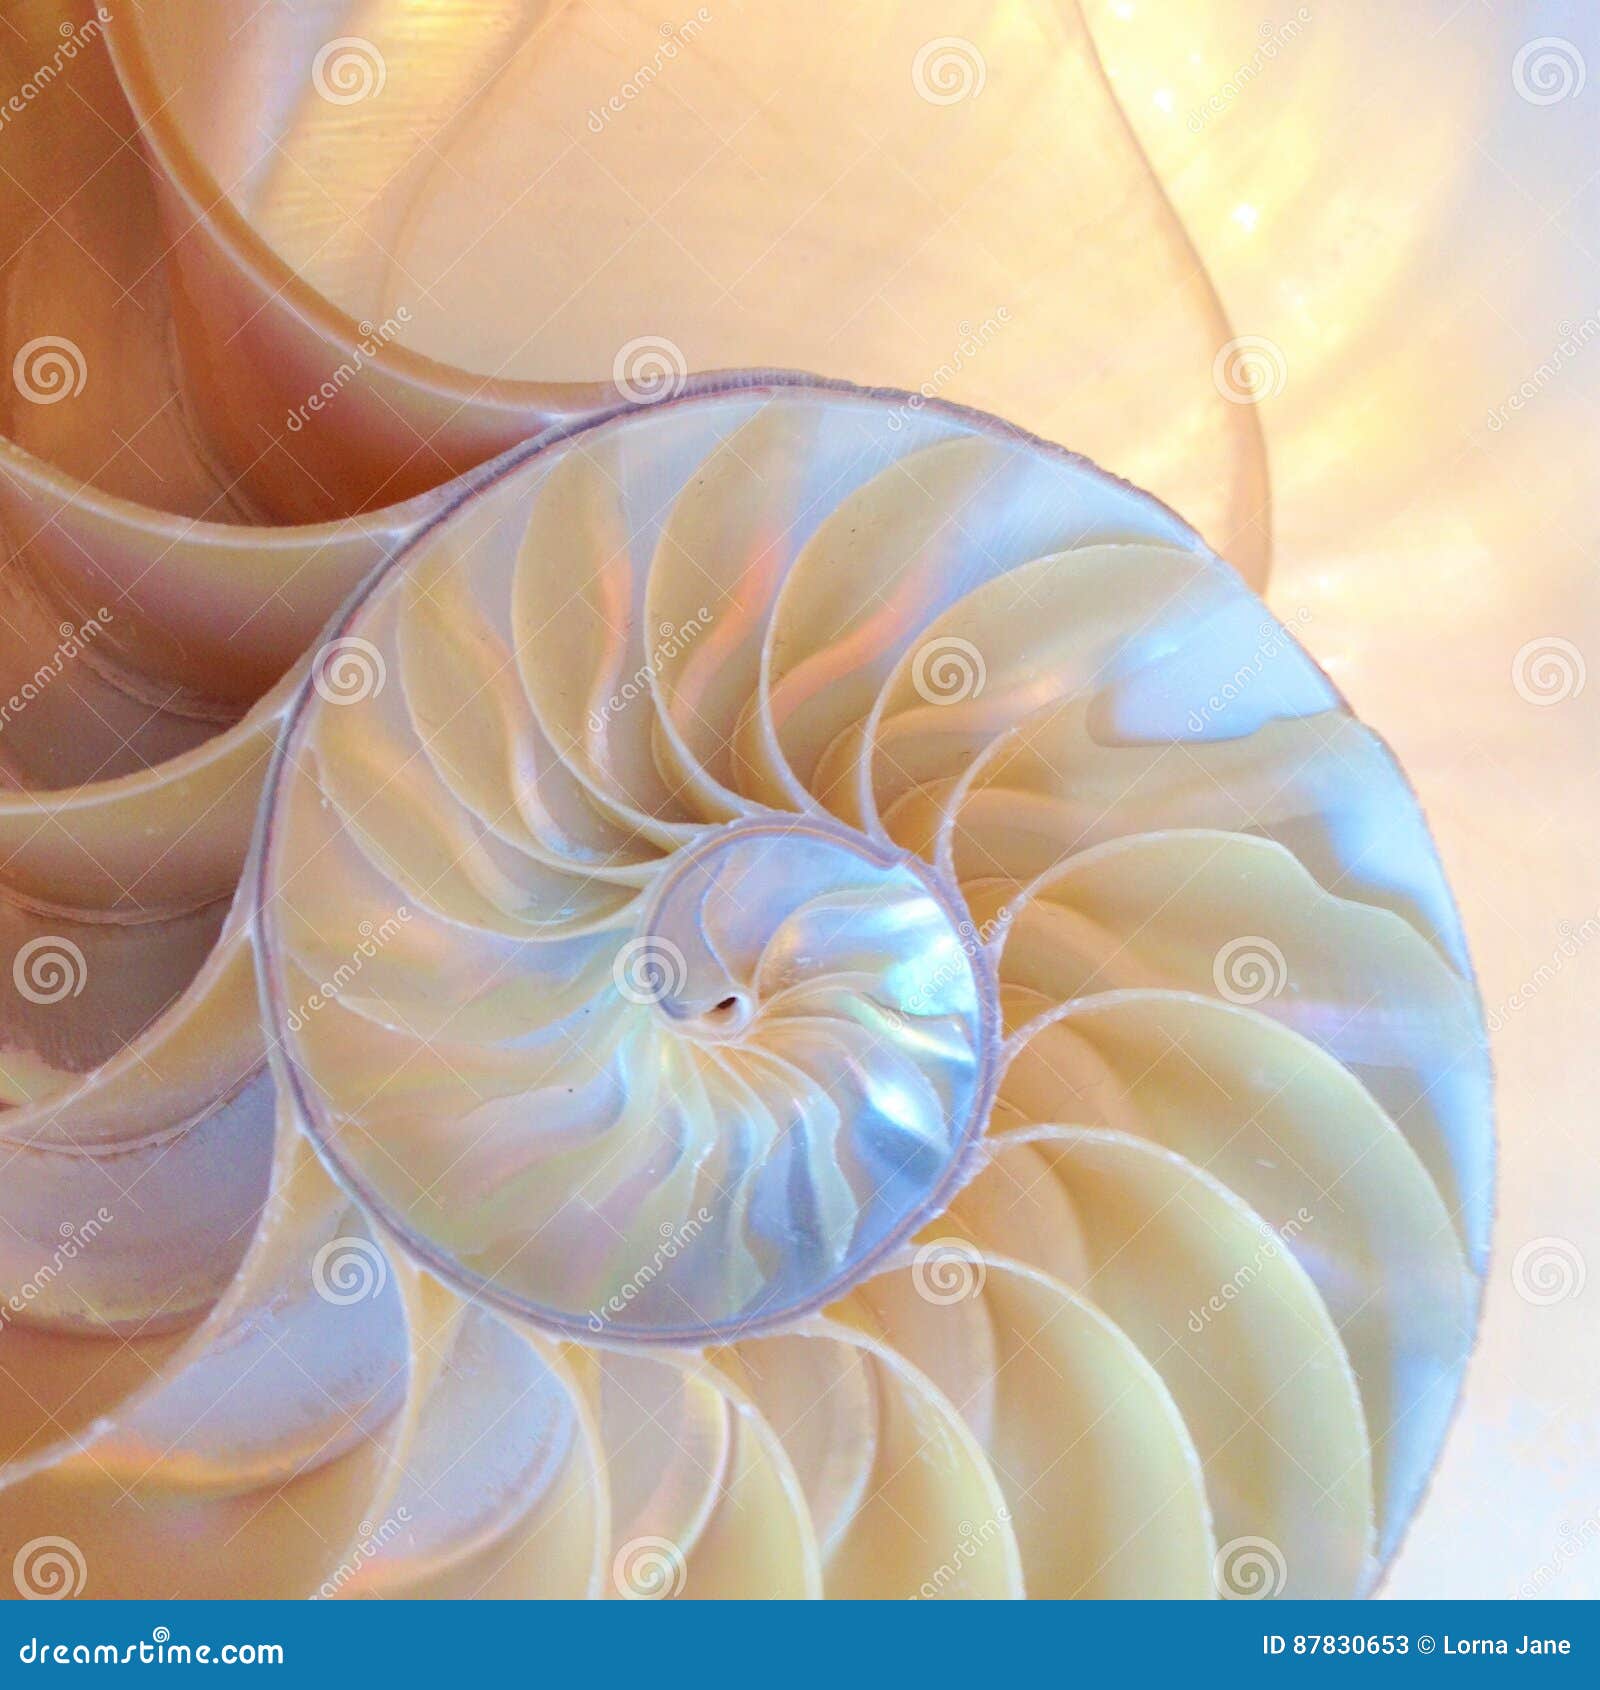 nautilus shell symmetry fibonacci half cross section spiral golden ratio structure growth close up back lit mother of pearl close